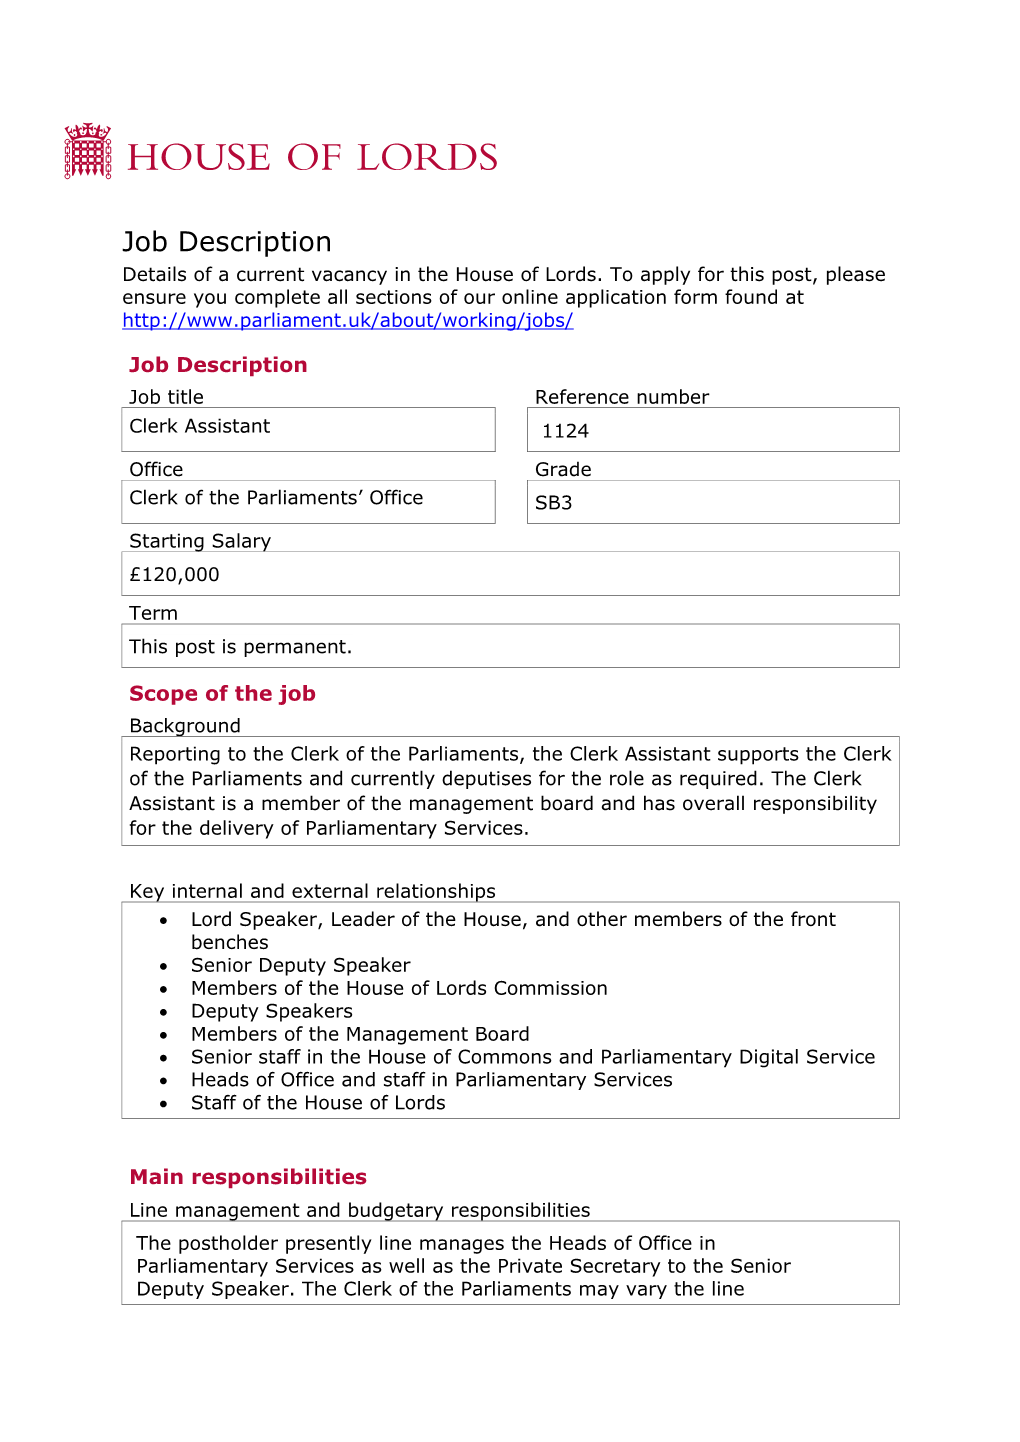 Job Description Details of a Current Vacancy in the House of Lords